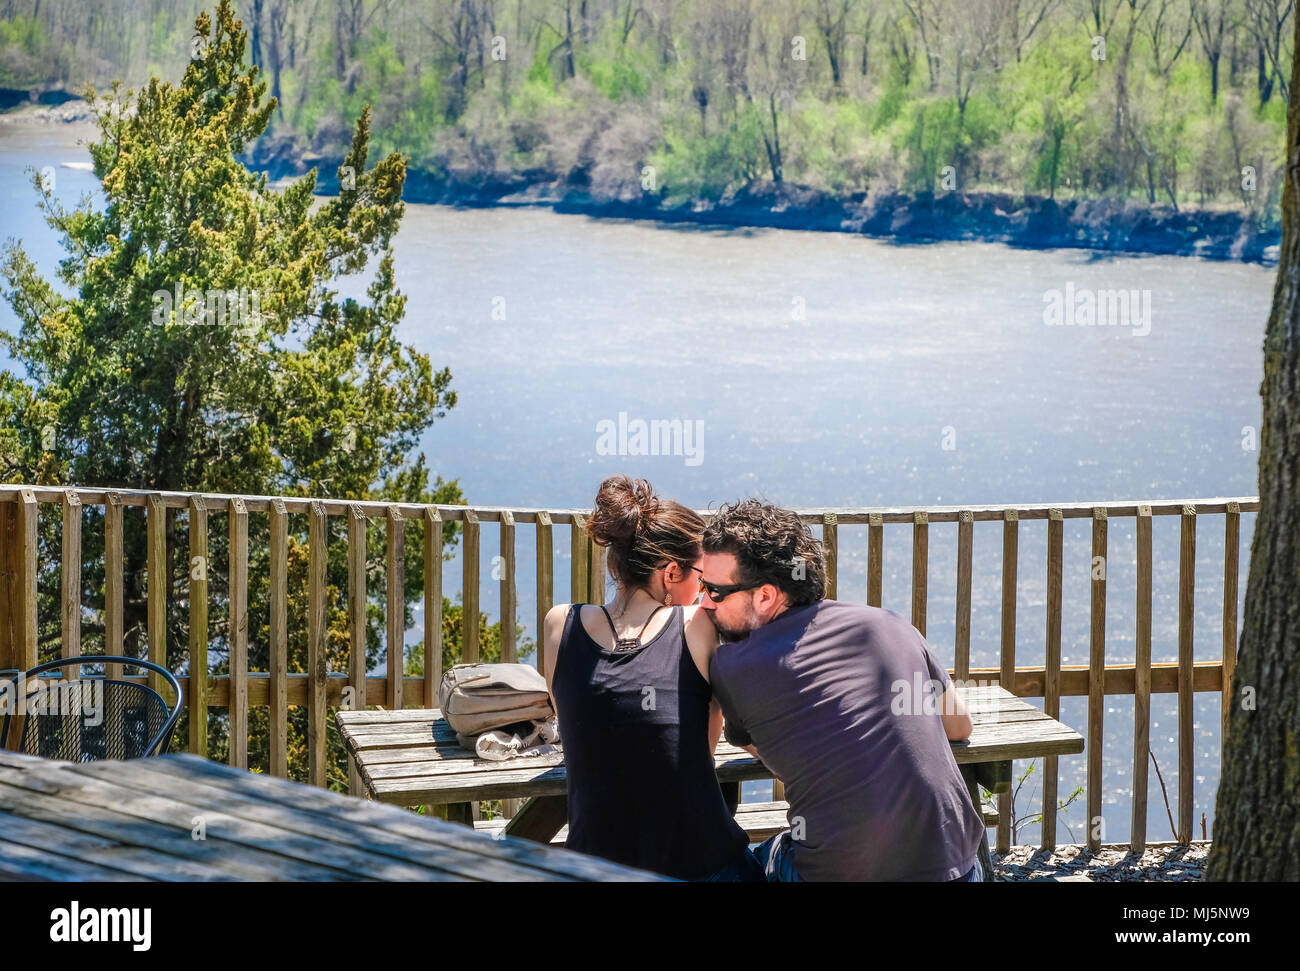 Rocheport, Missouri, USA, April 30, 2018: Young couple sitting by the river; man tenderly kissing the woman's shoulder; river and woods in the backgro Stock Photo